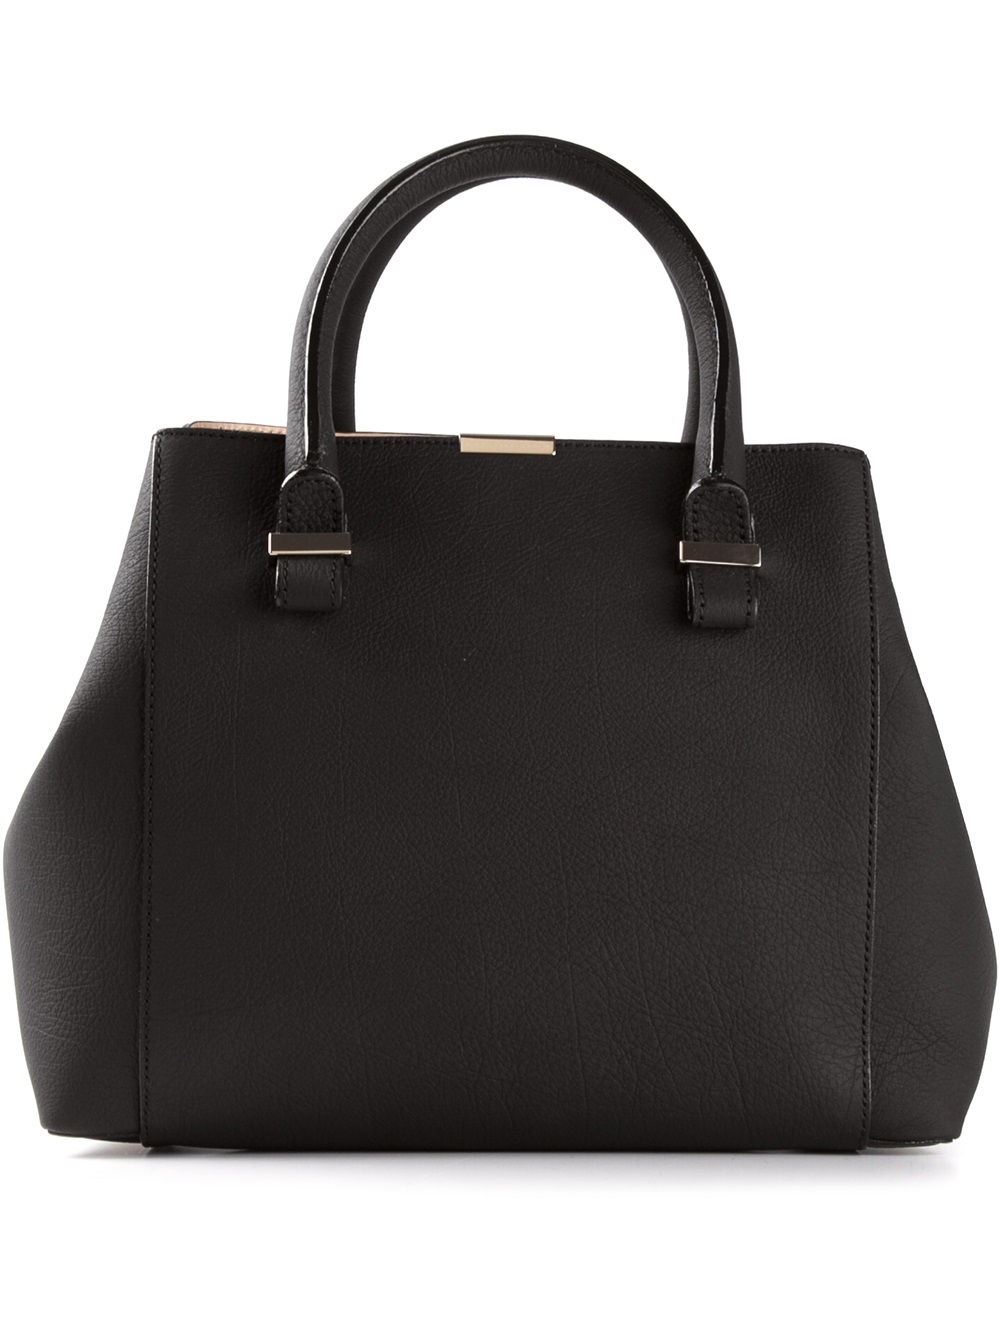 Victoria Beckham Quincy Tote Bag in Blue | Lyst